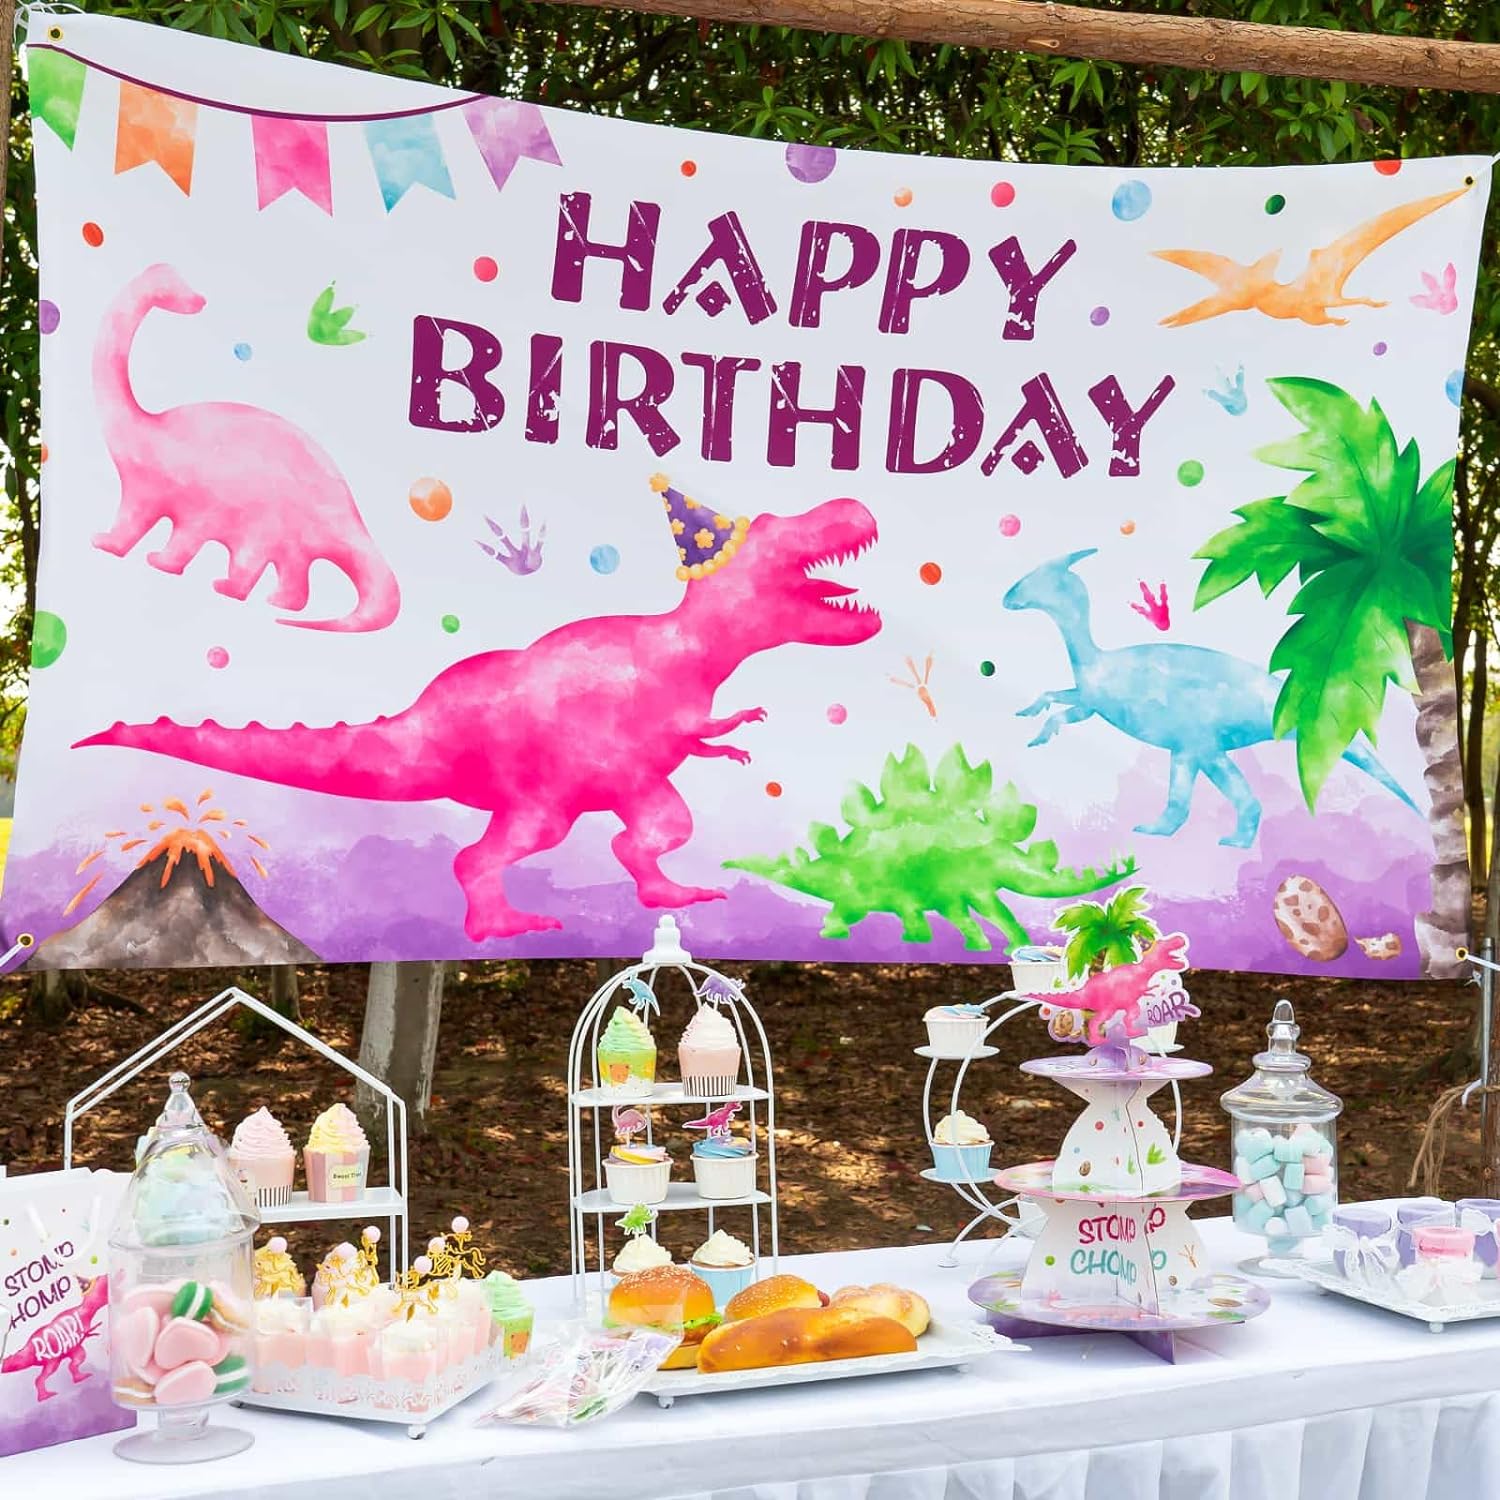 Bulk 73'' x 43'' Watercolor Dinosaur Background Banner Perfect for Dinosaur Themed Birthday Parties | Indoor Outdoor Photography Backdrop | Girls Kids Party Decor Wholesale